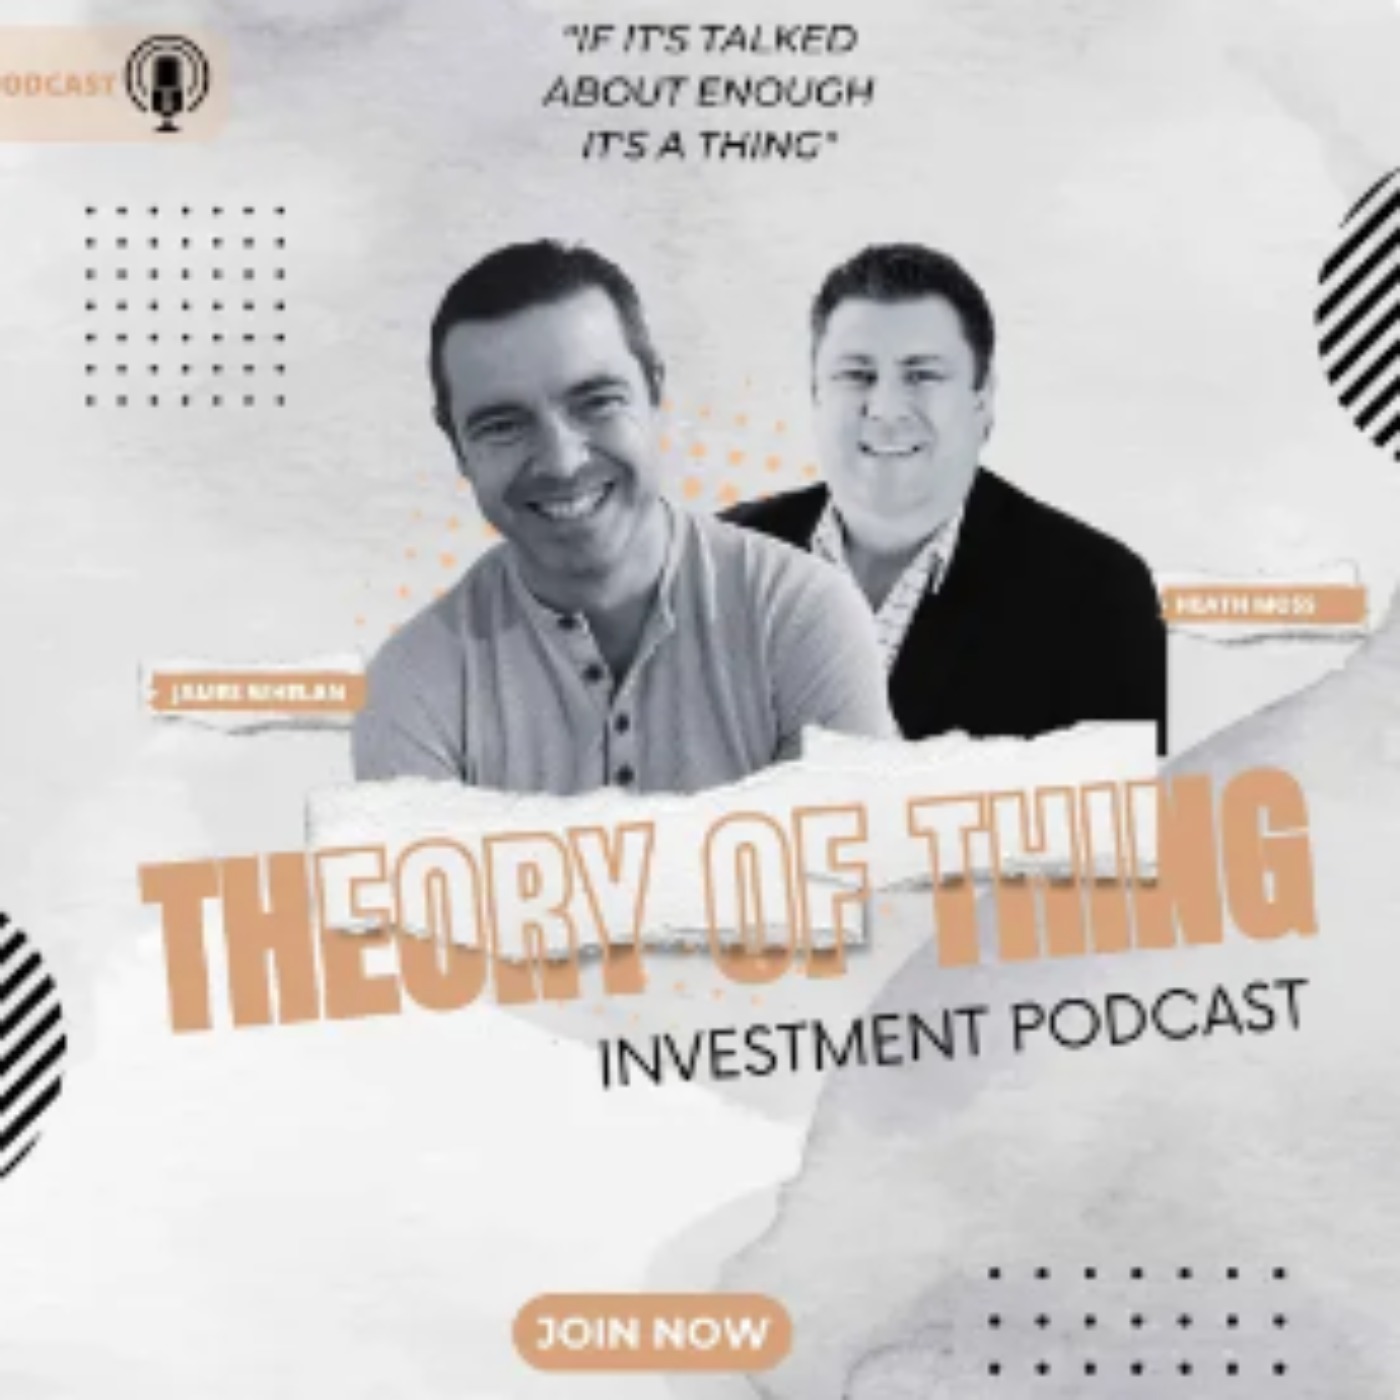 Episode 31 of The Theory of Thing Investment Podcast